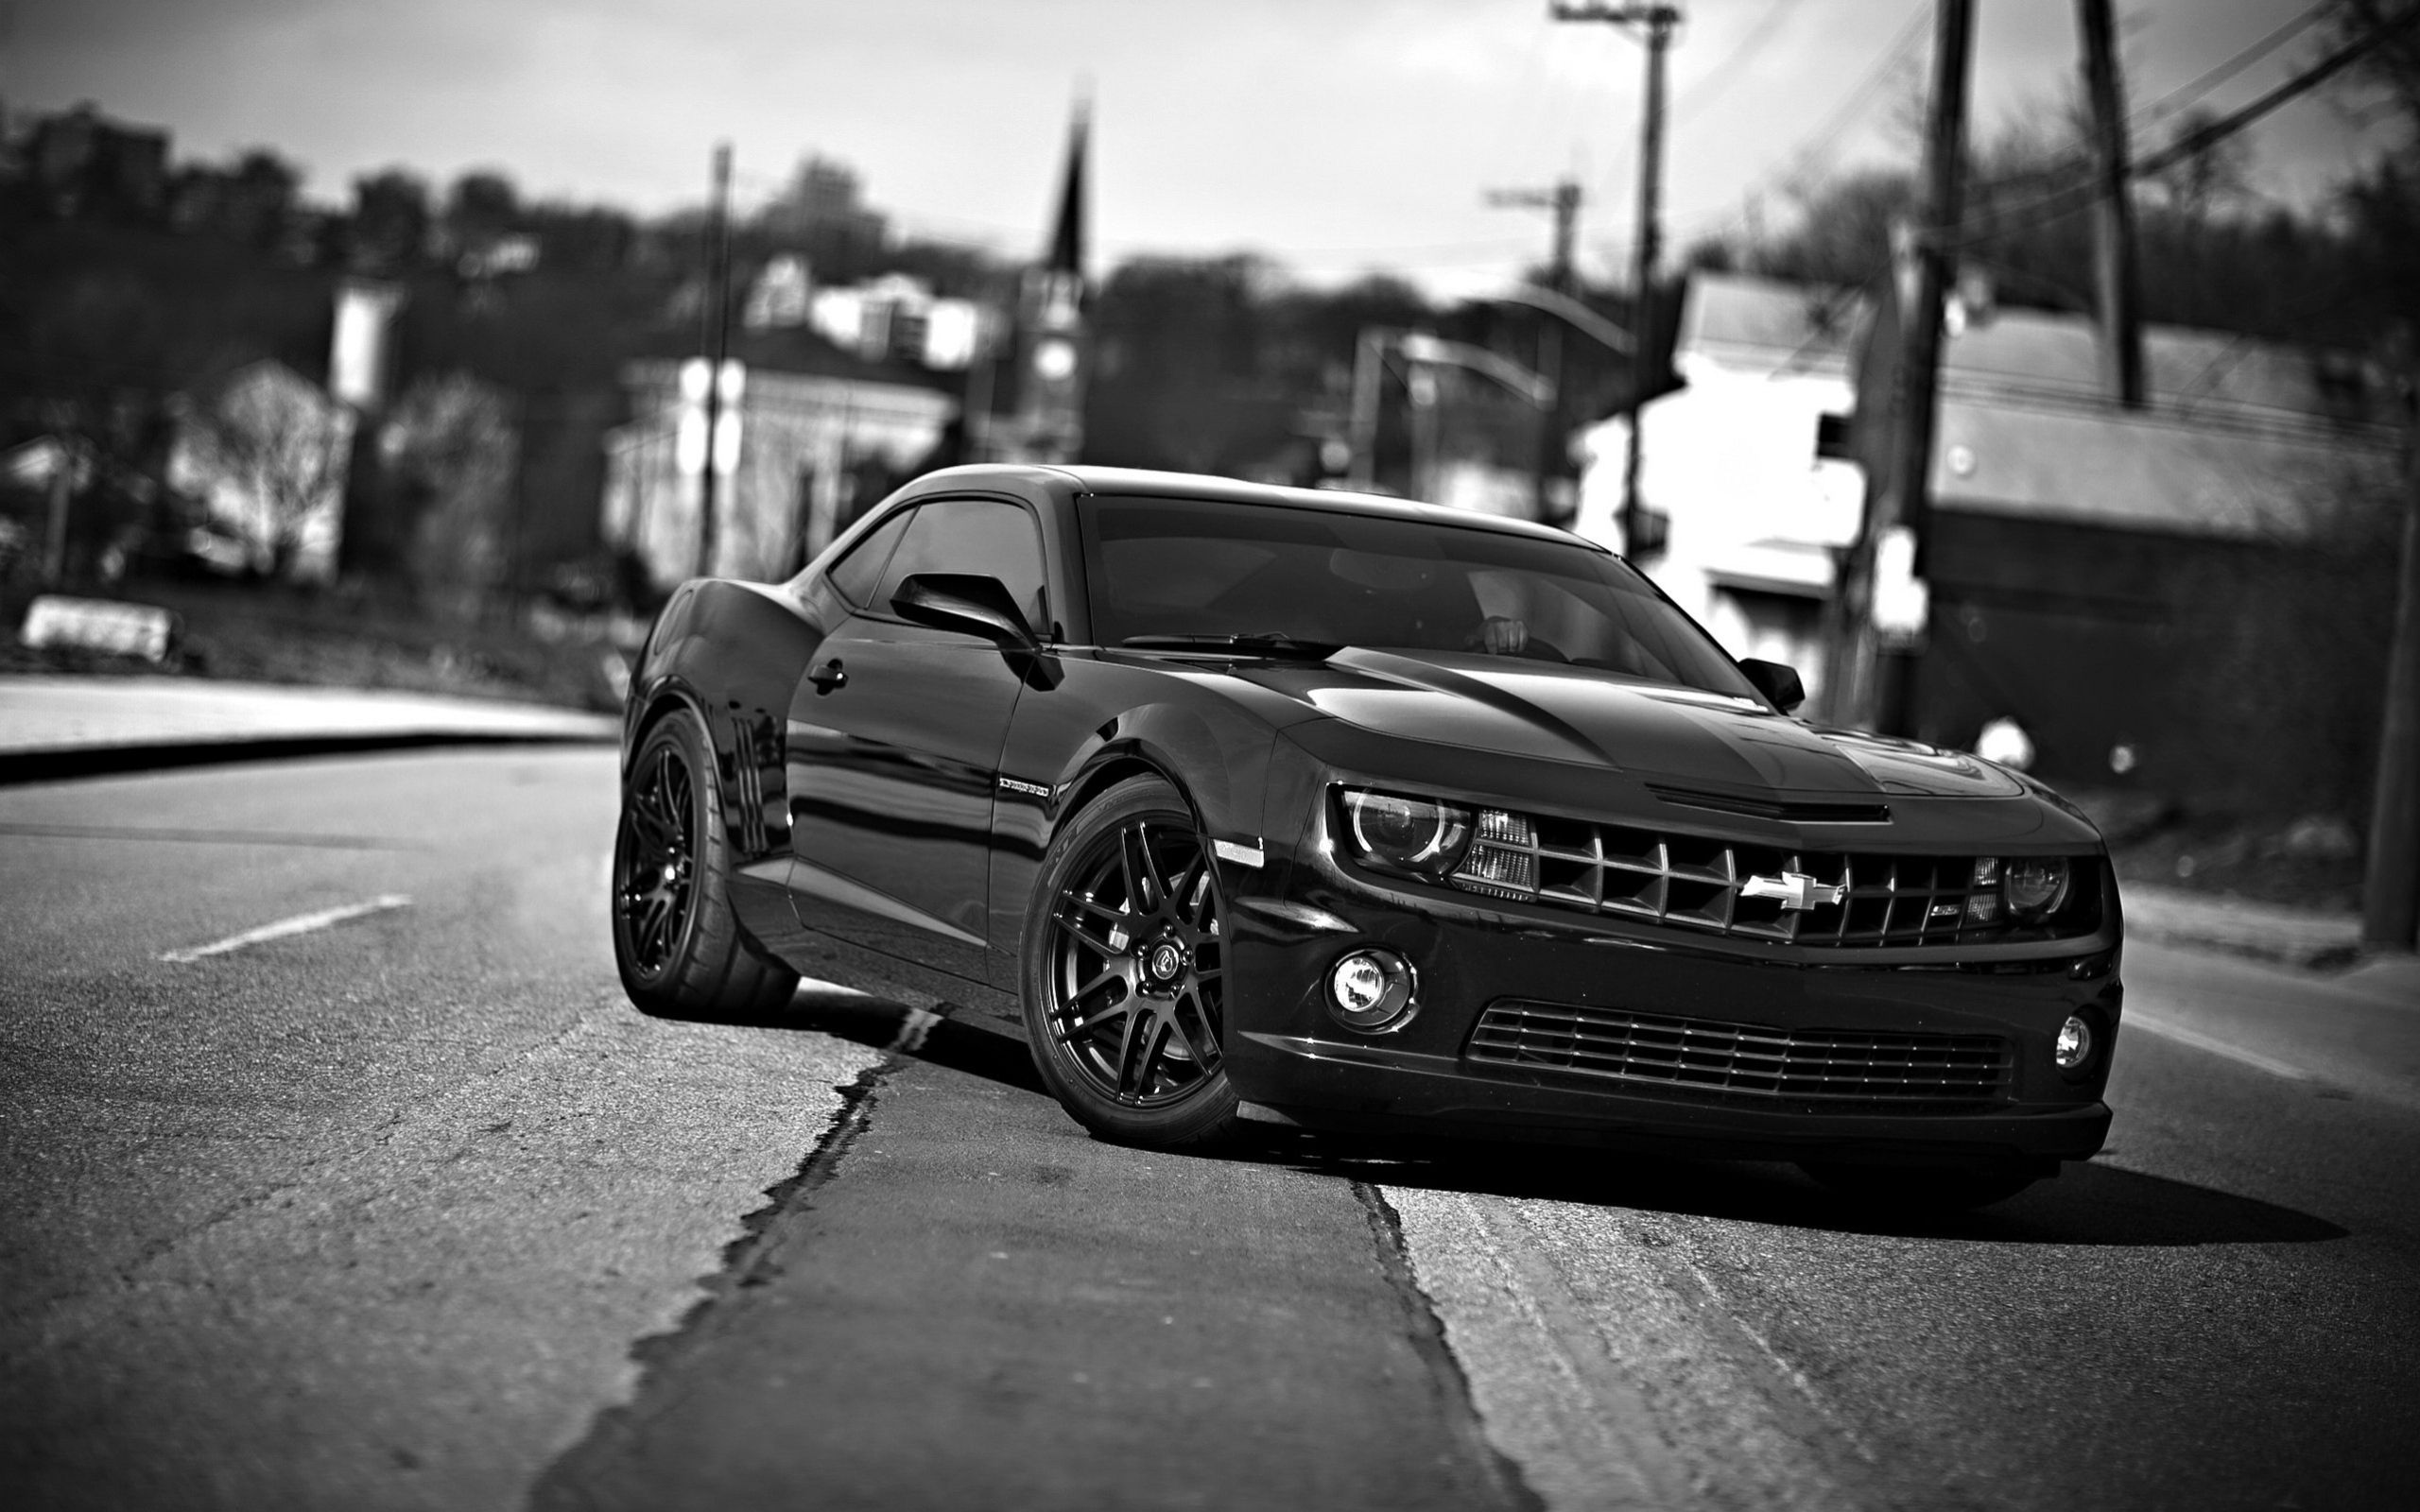 144692 download wallpaper auto, chevrolet, cars, front view, bw, chb, chevrolet camaro screensavers and pictures for free